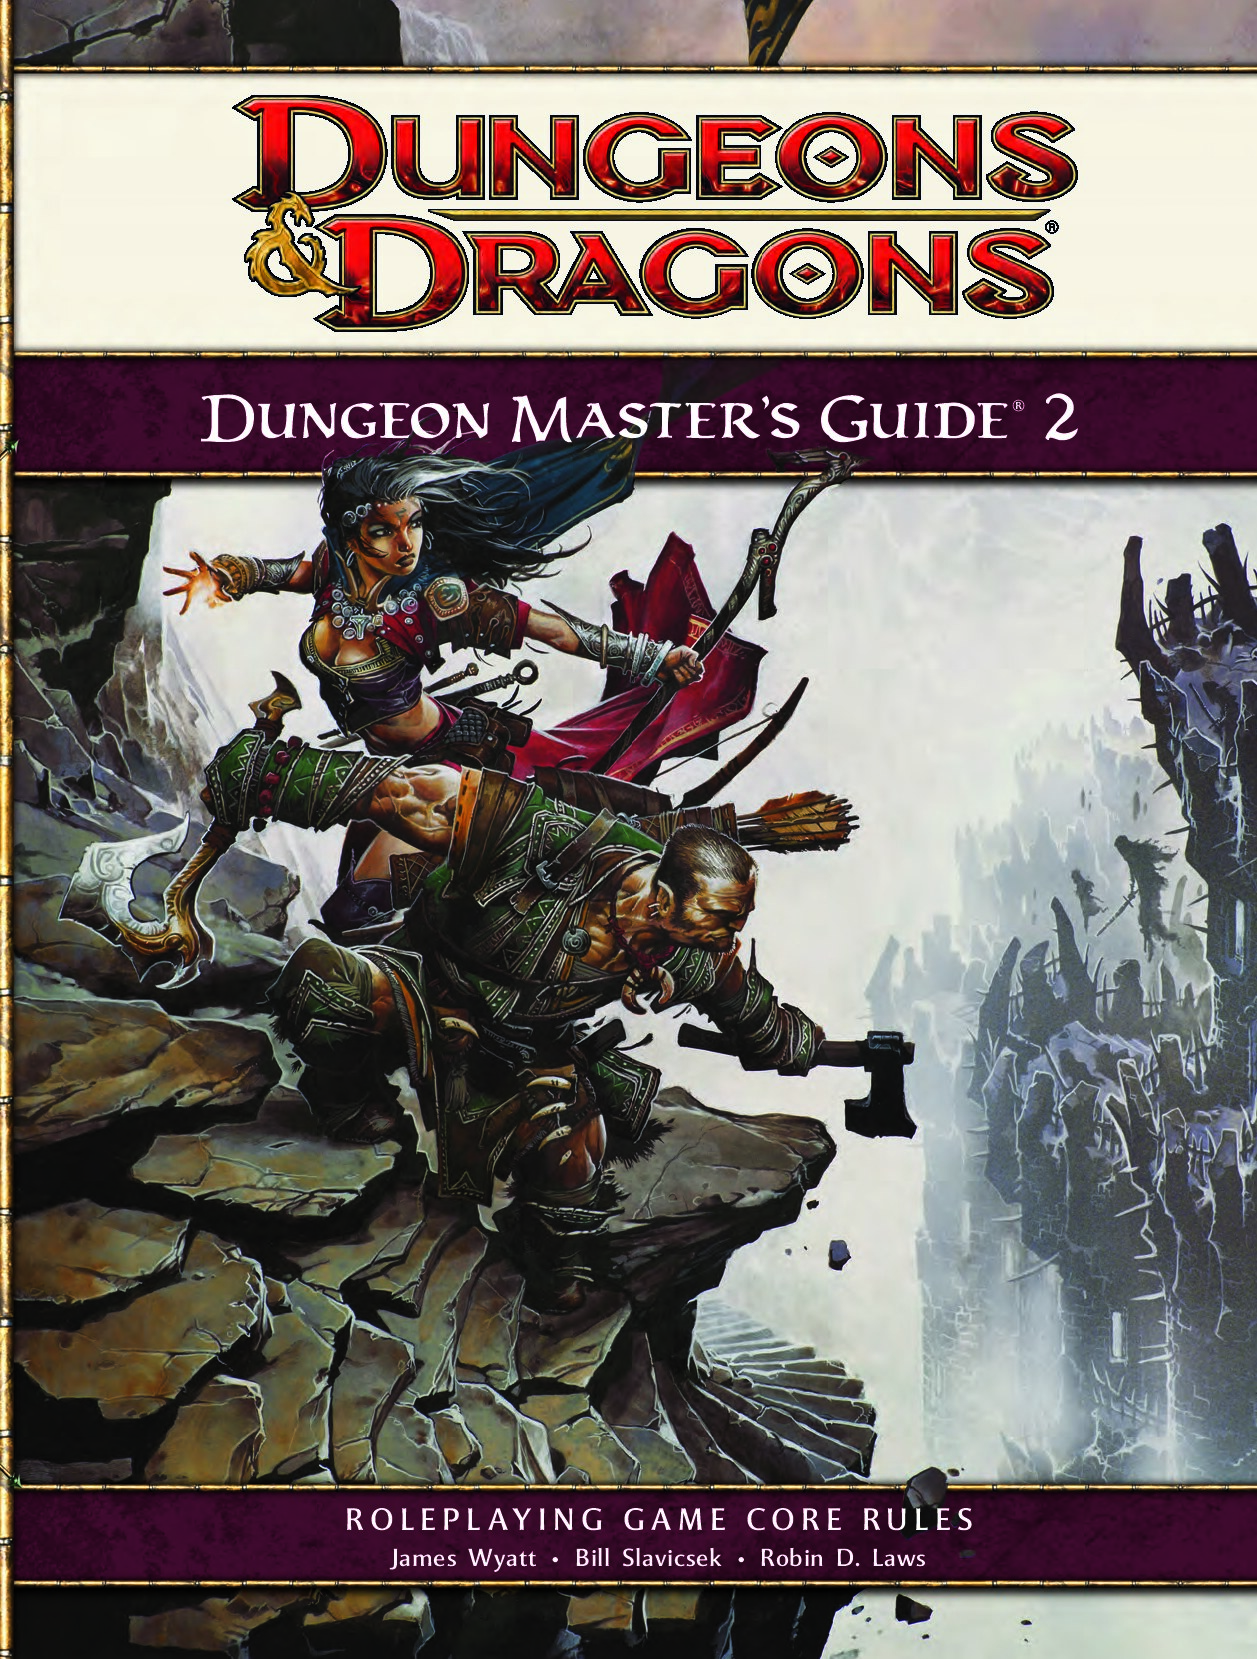 Dungeon Master’s Guide 2